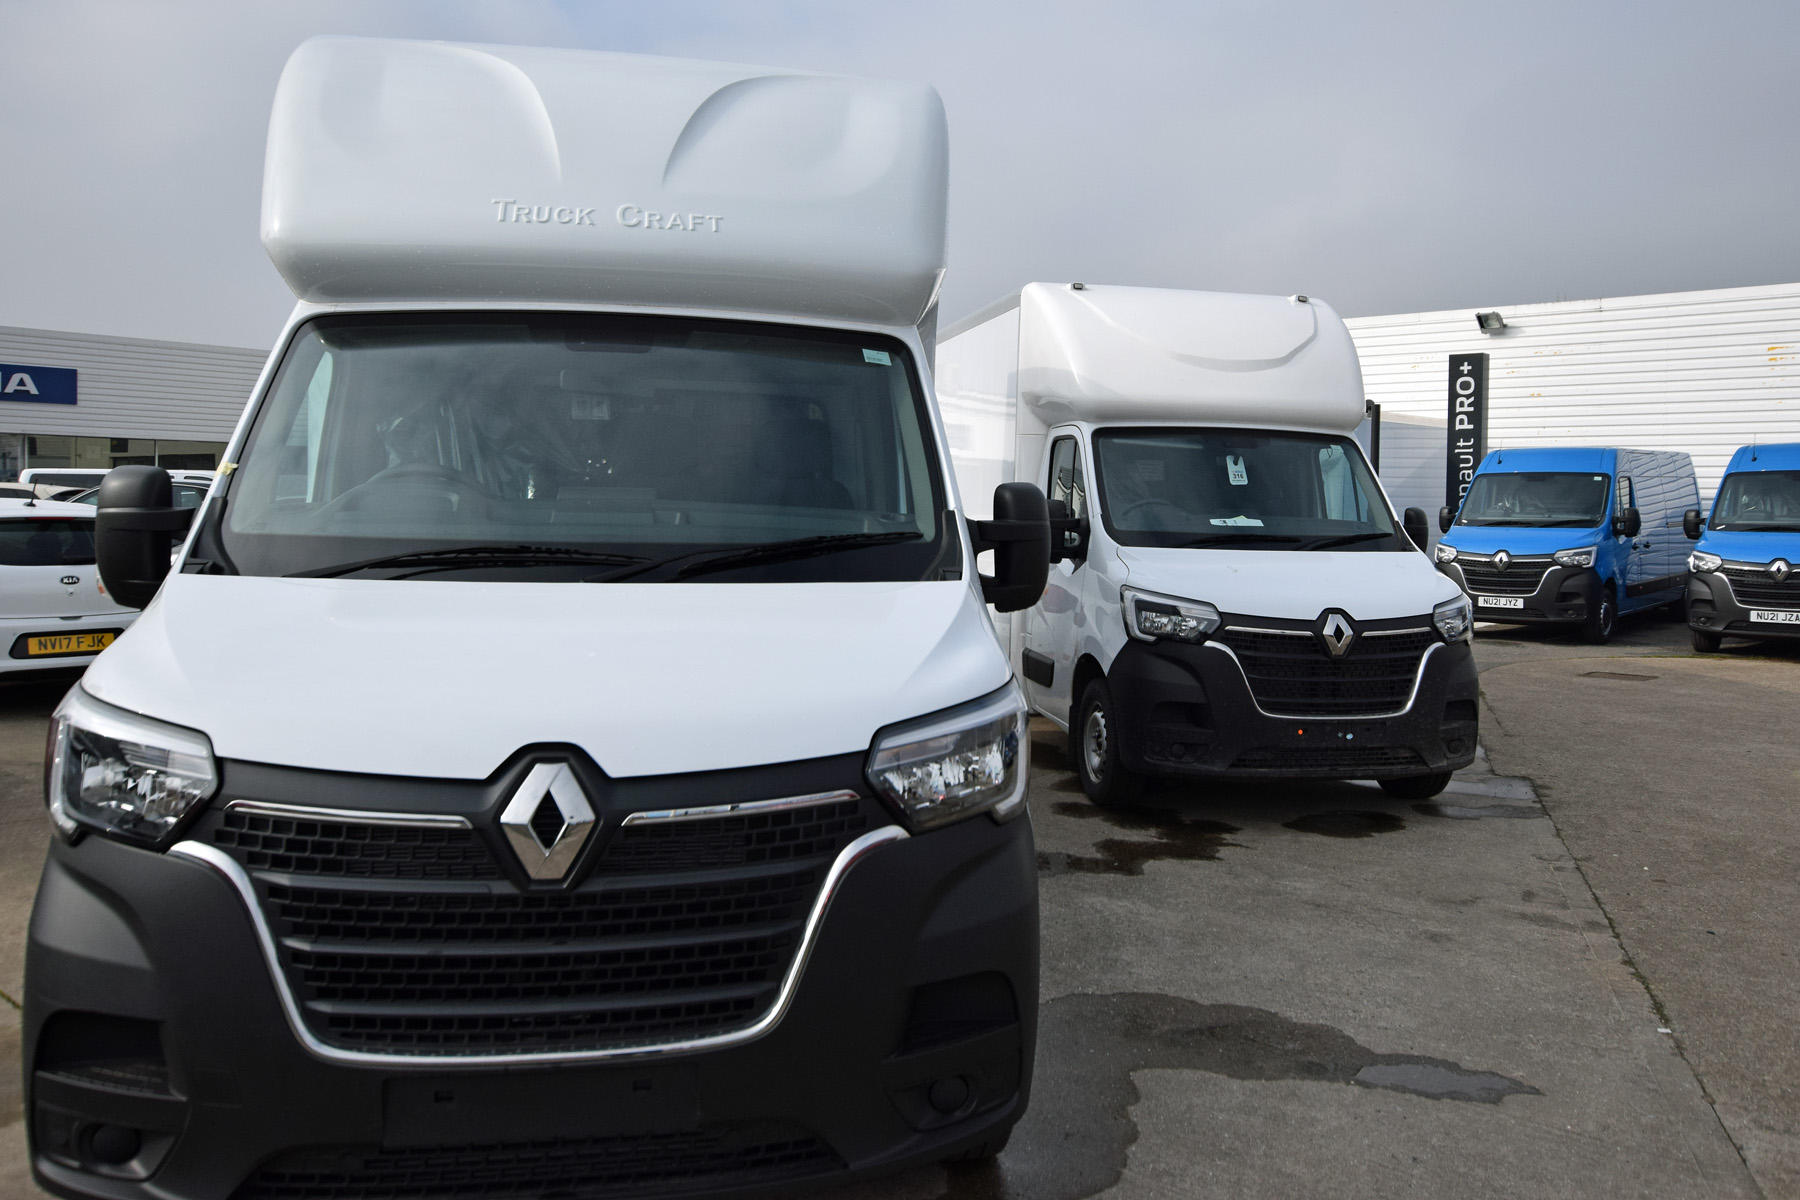 Renault vans outside the Middlesbrough dealership Evans Halshaw Renault Middlesbrough Middlesbrough 01642 757500